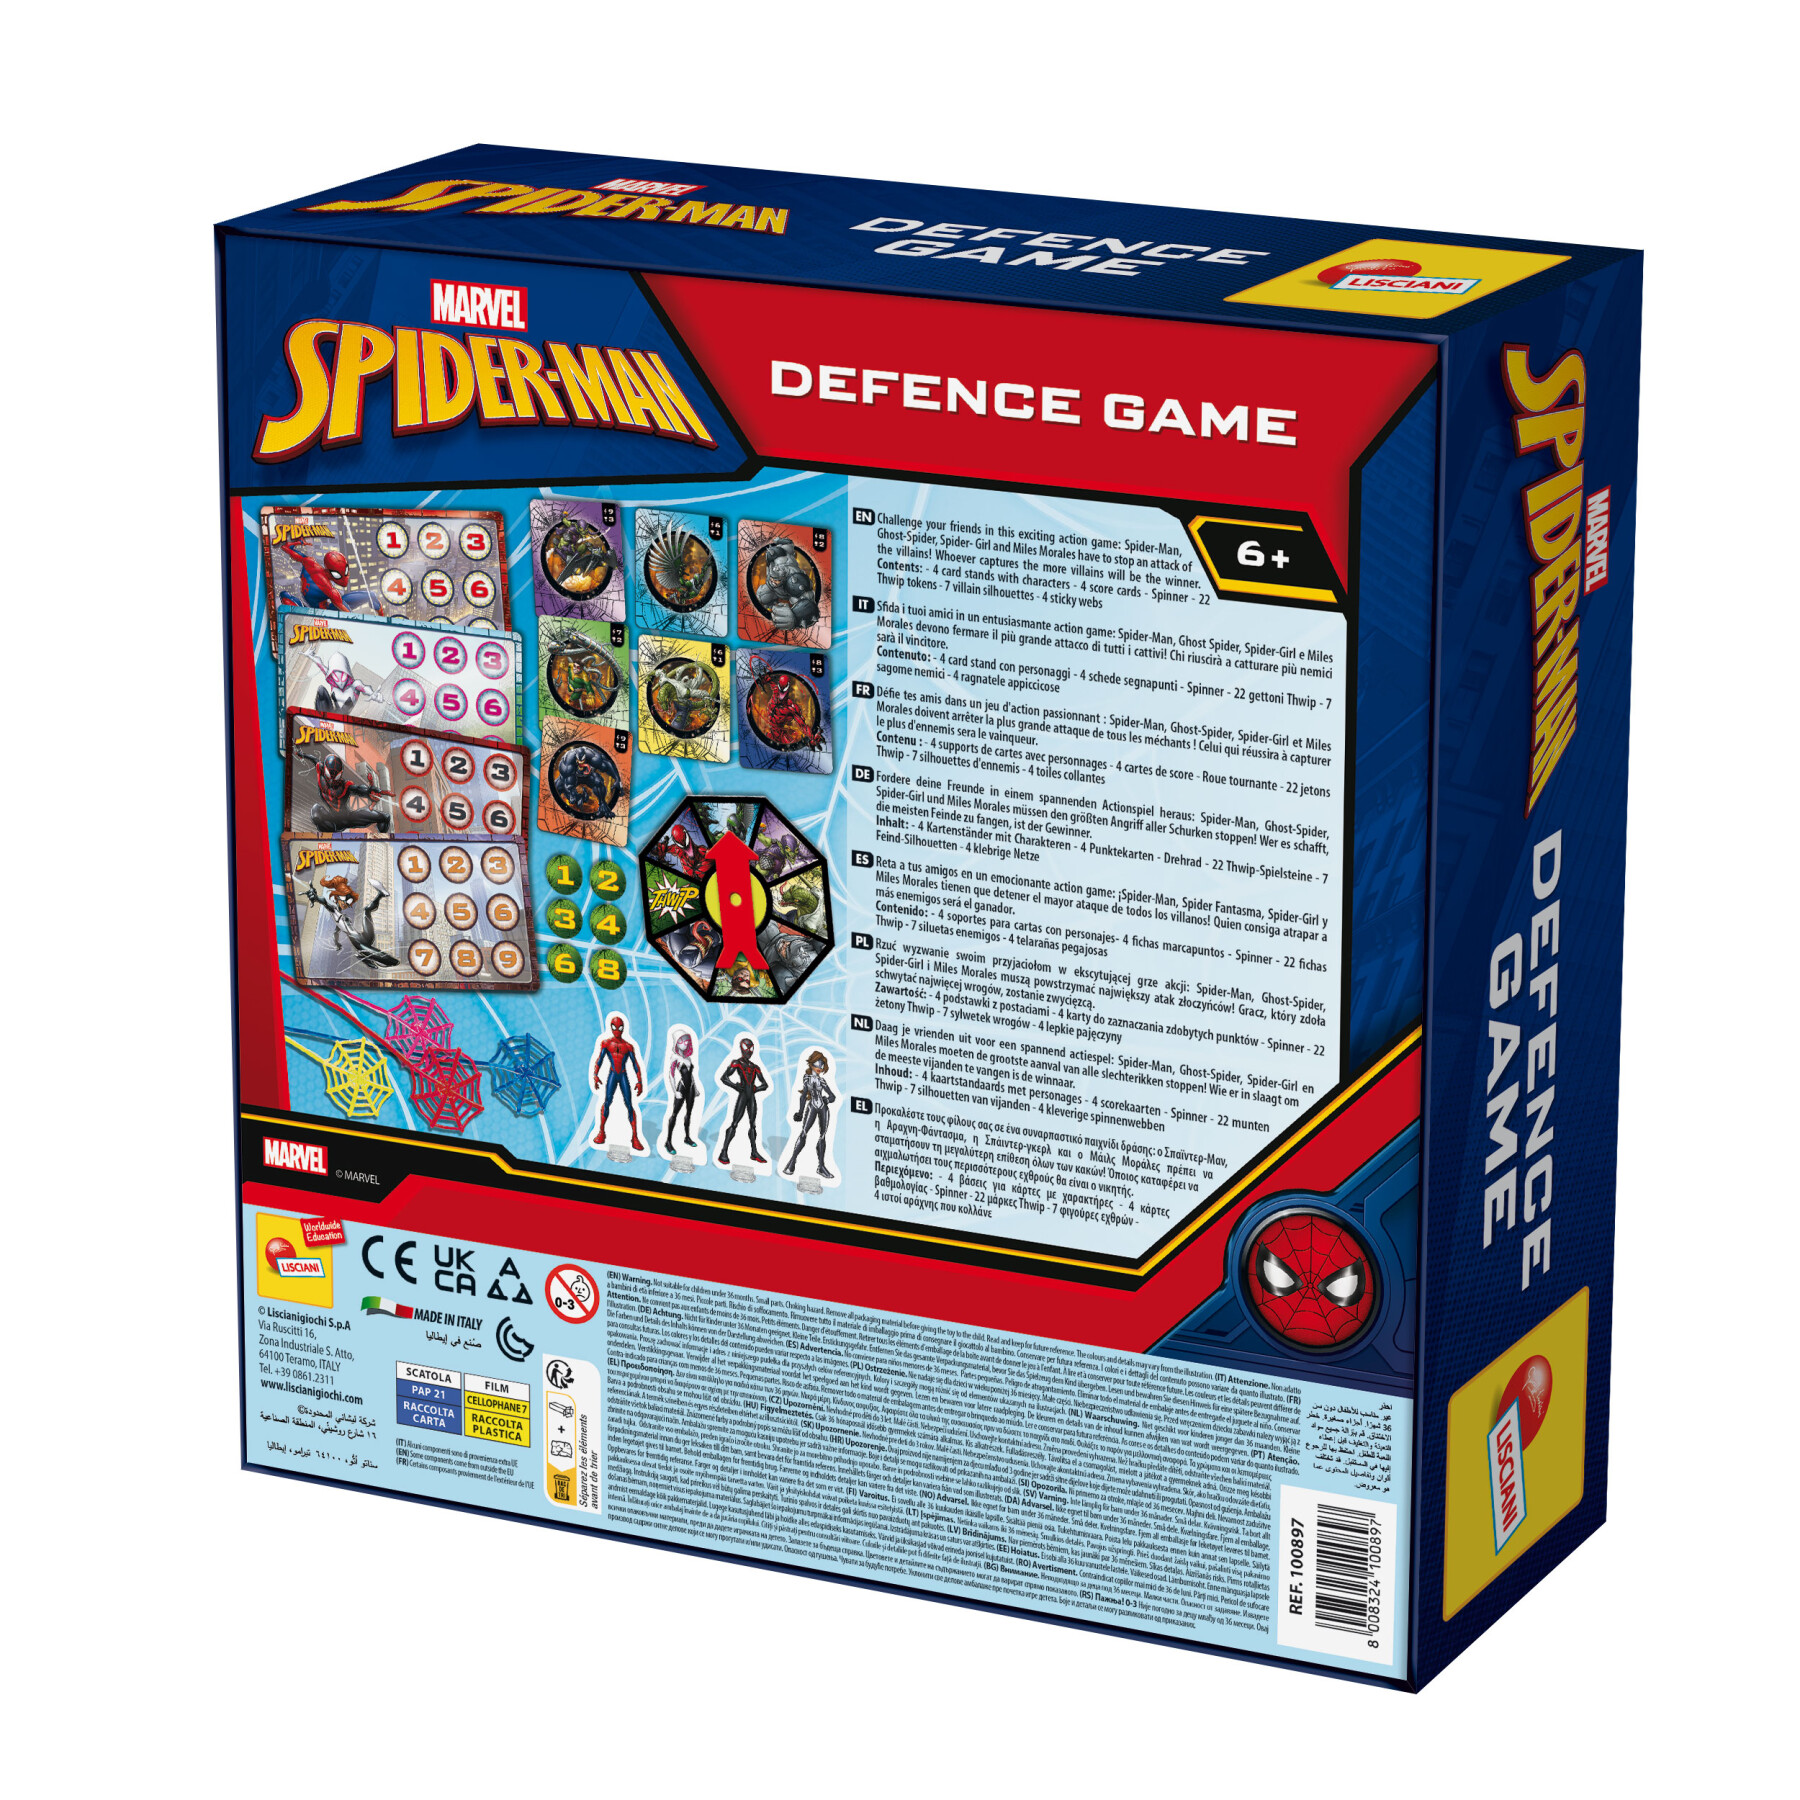 Spider-man defence game - LISCIANI, Avengers, Spiderman